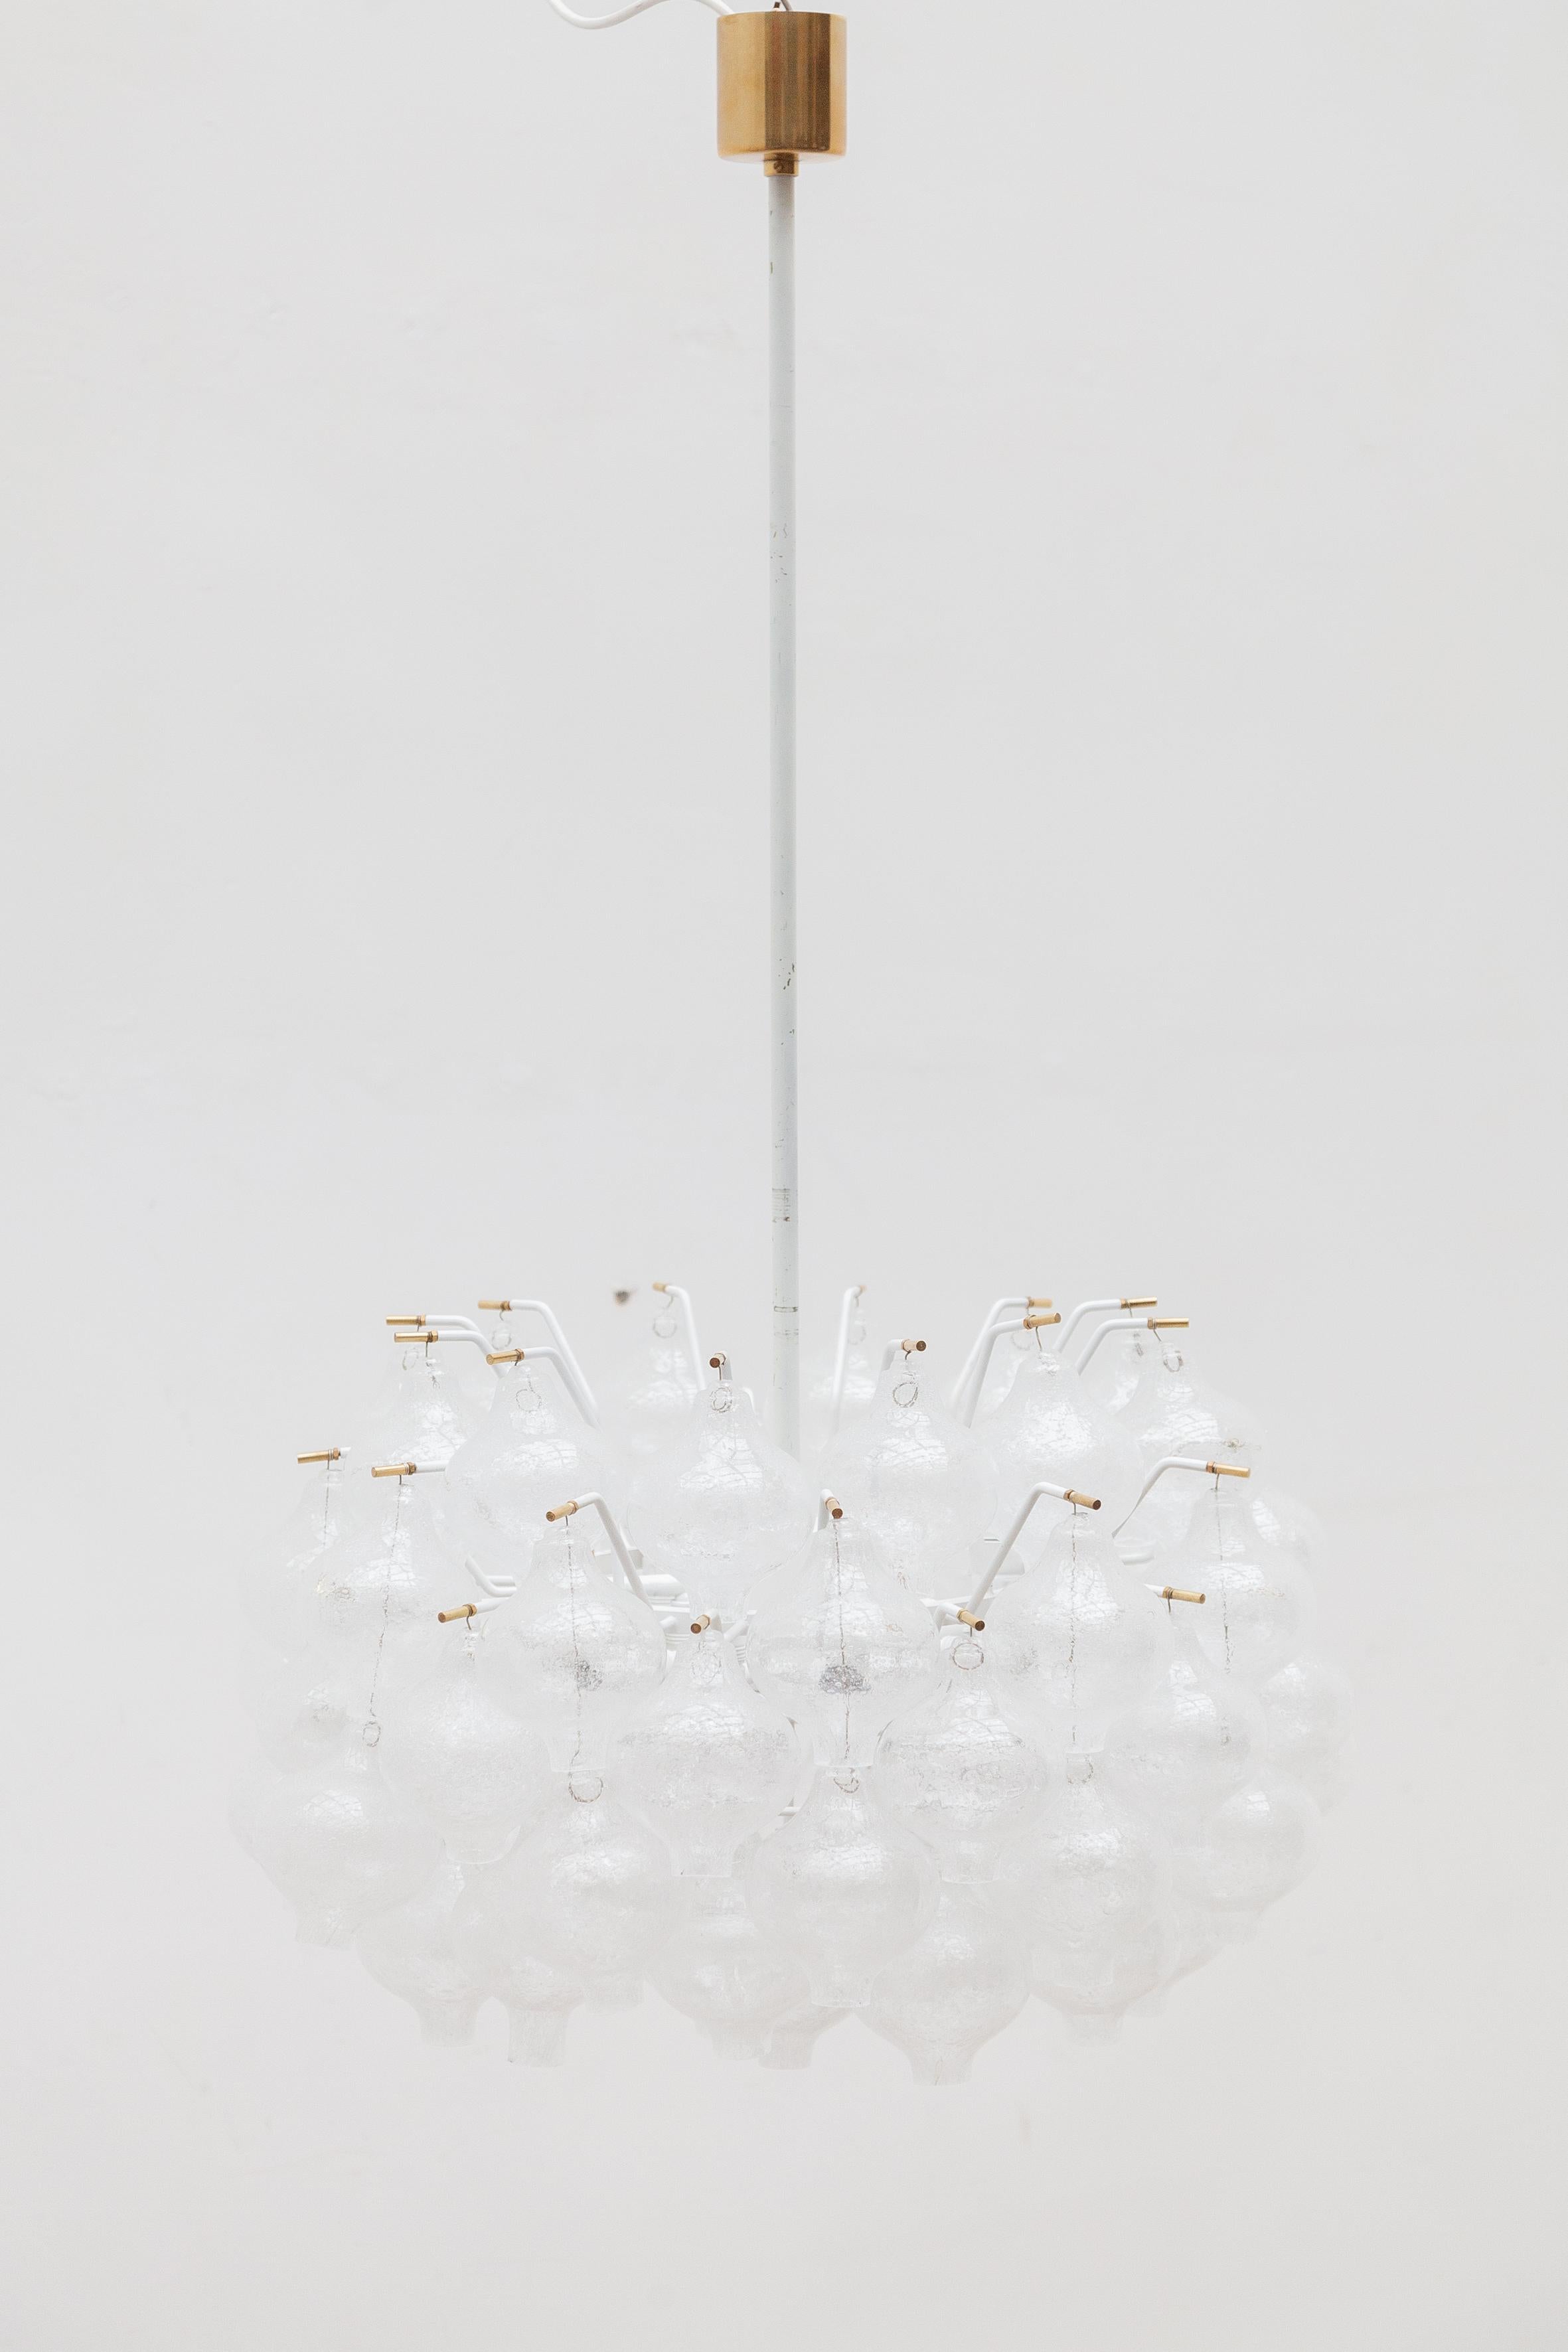 A large impressive 'Tulipan' chandelier with five-layered onion shaped glass elements, designed by J.T. Kalmar in the 1950s.Every glass onion has a small arm holding it up, with beautiful brass details at the end. The frame of the lamp is white